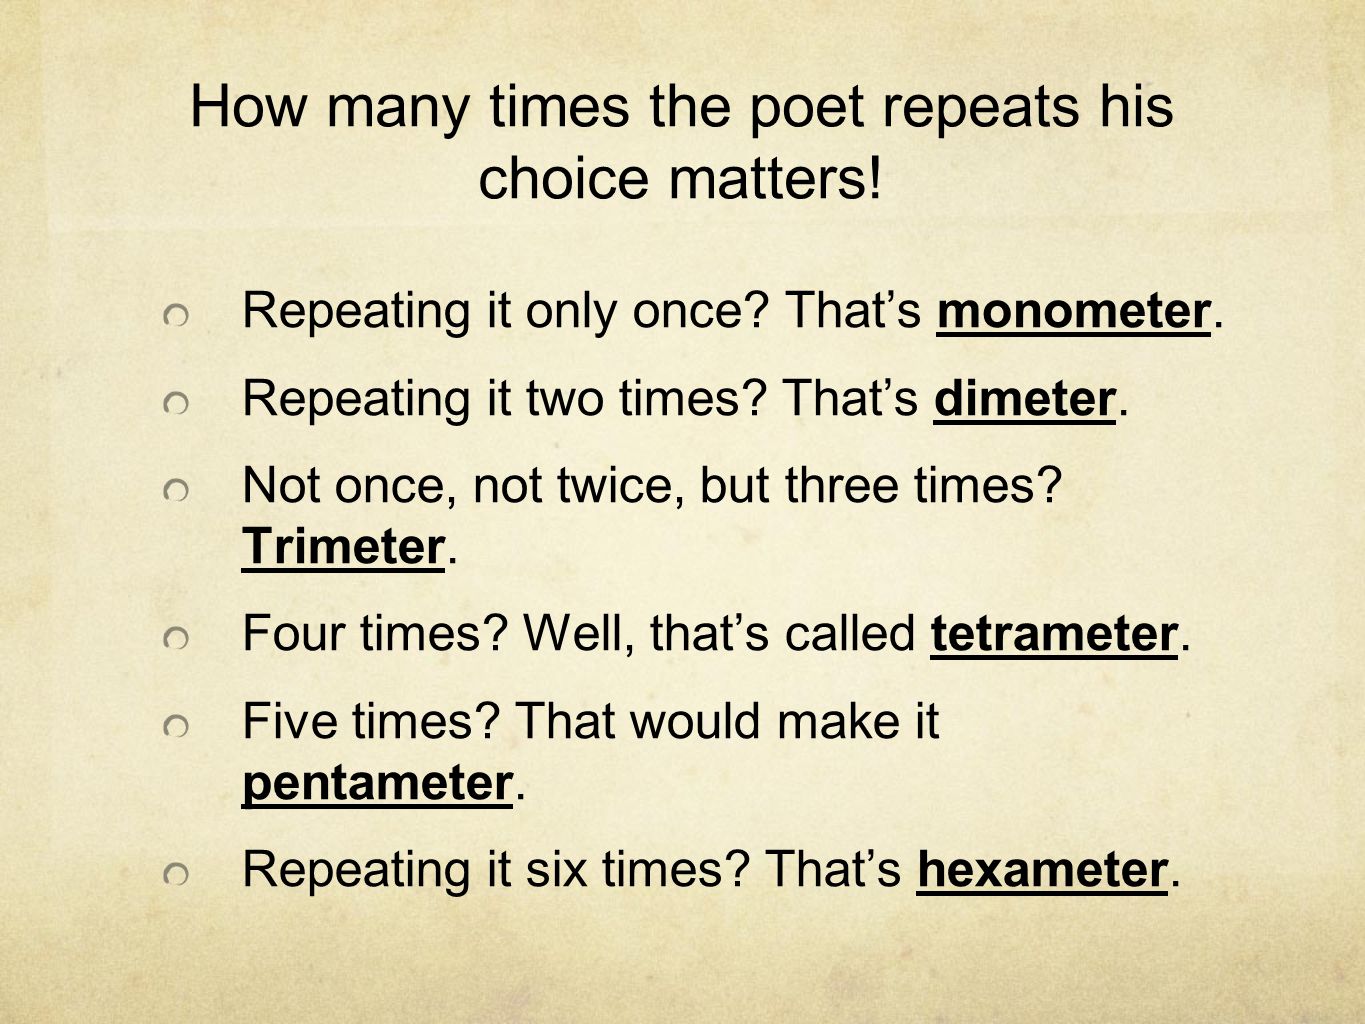 How many times the poet repeats his choice matters!